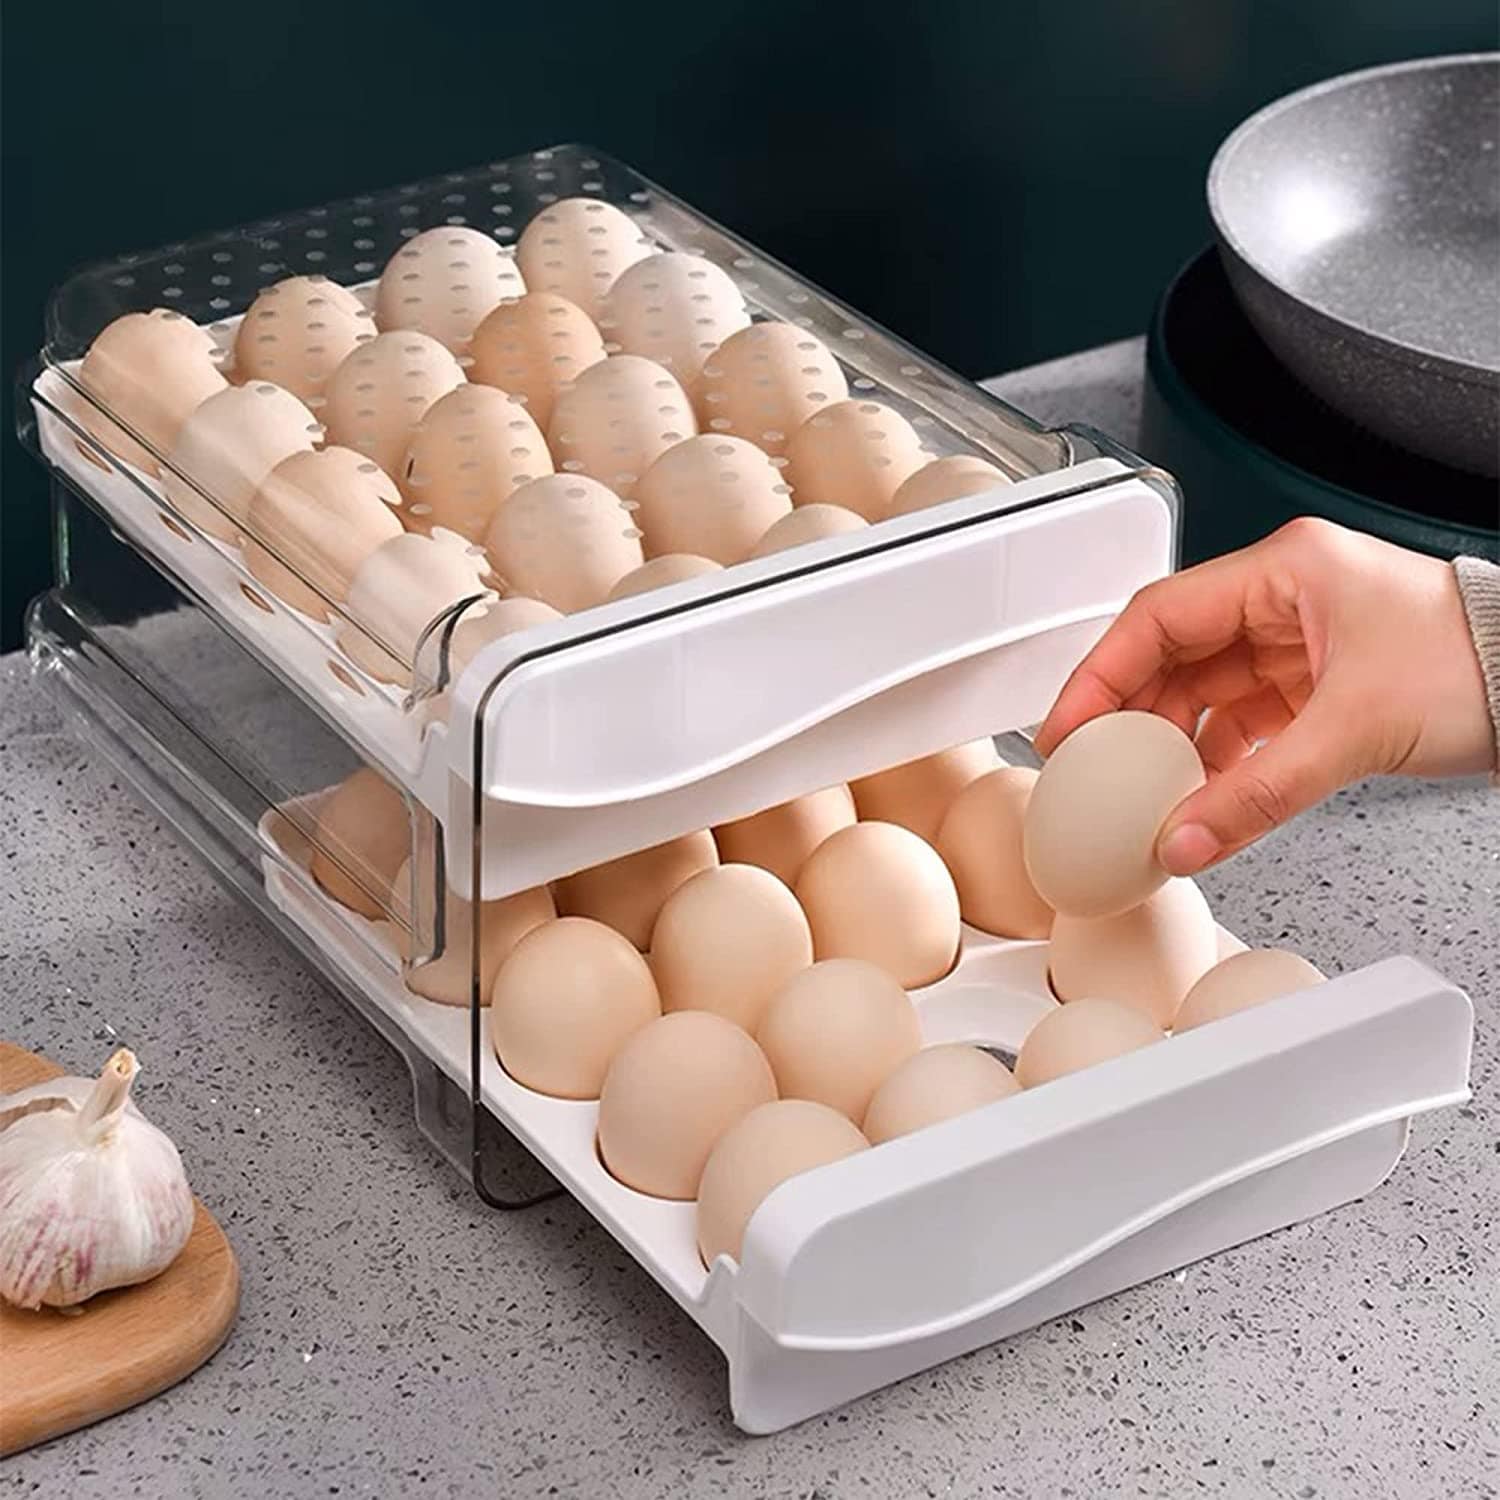 https://ak1.ostkcdn.com/images/products/is/images/direct/13f1405894327460c1db2442c04b923e25c42c10/Kitchen-Plastic-Egg-Holder%2CFridge-2-tier-Organizer-Container-with-Handles.jpg